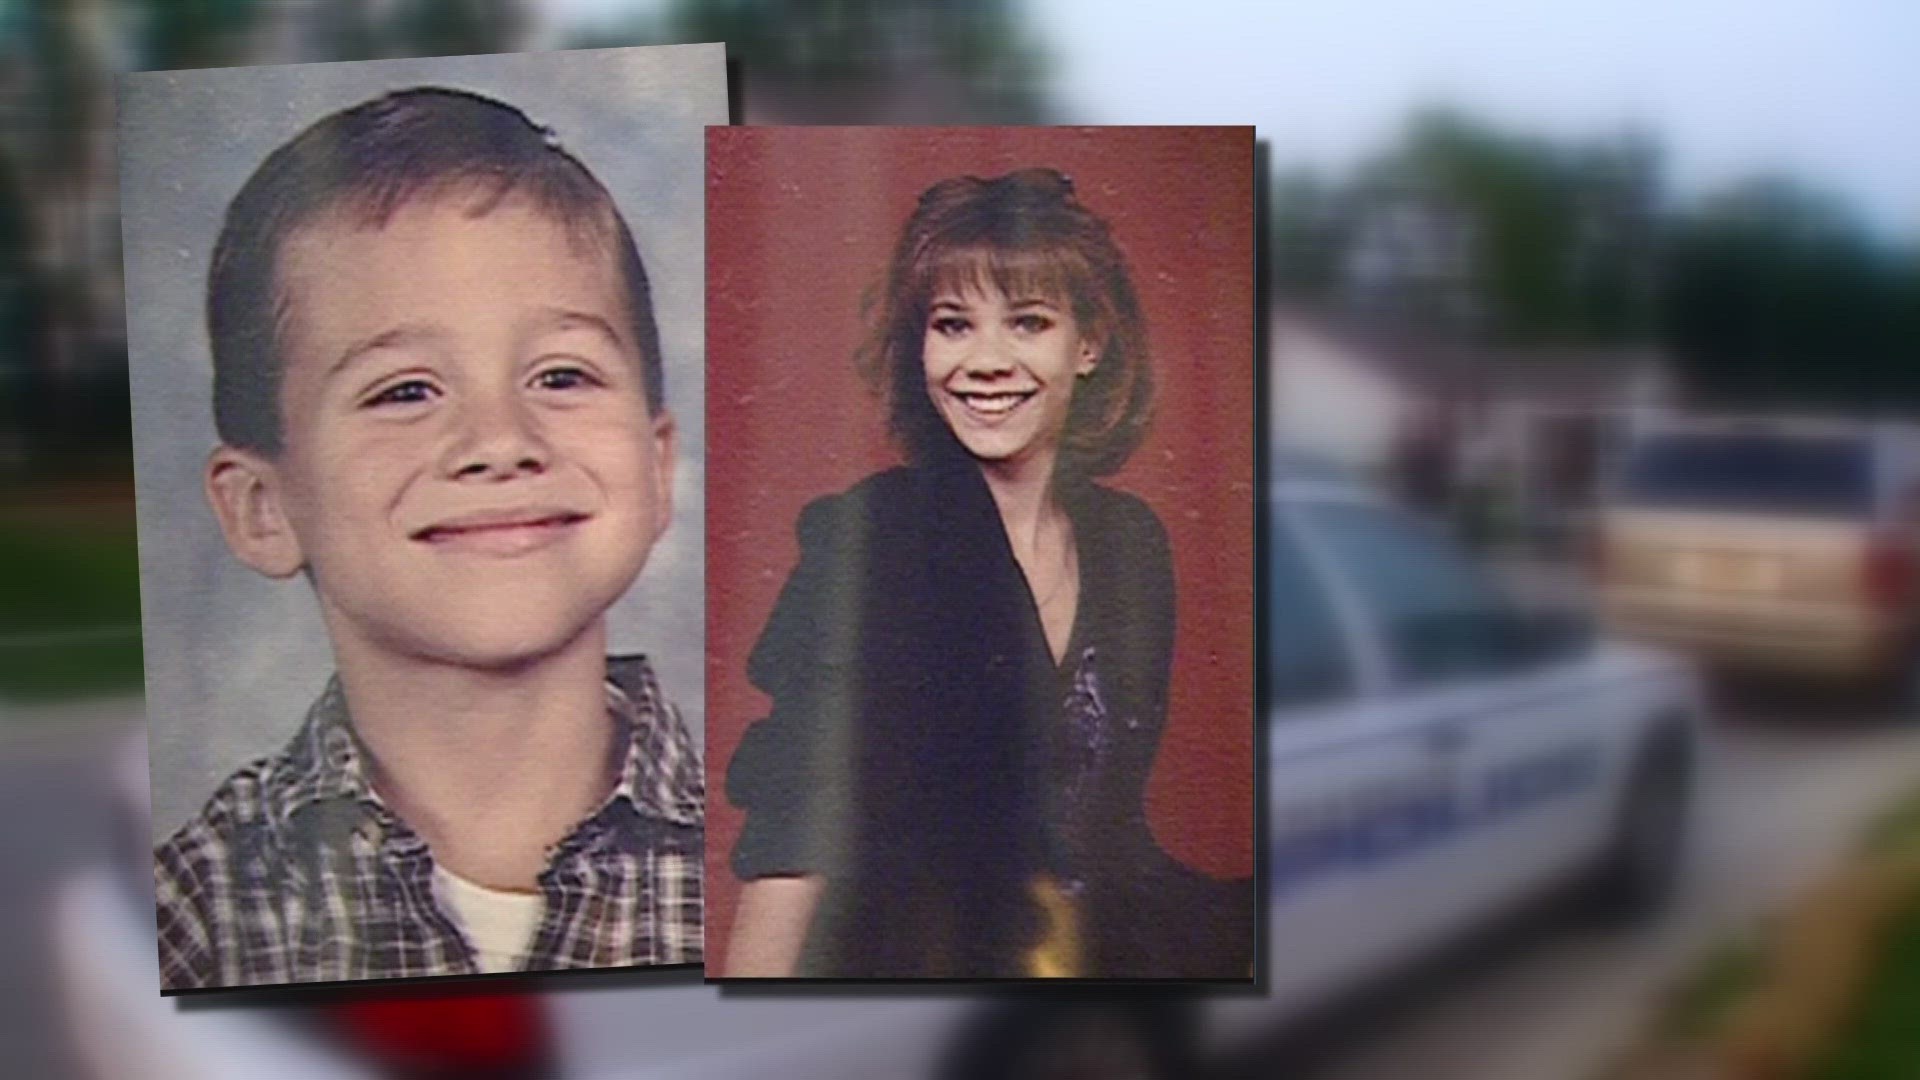 Franklin Double Murder Remains Unsolved 17 Years Later